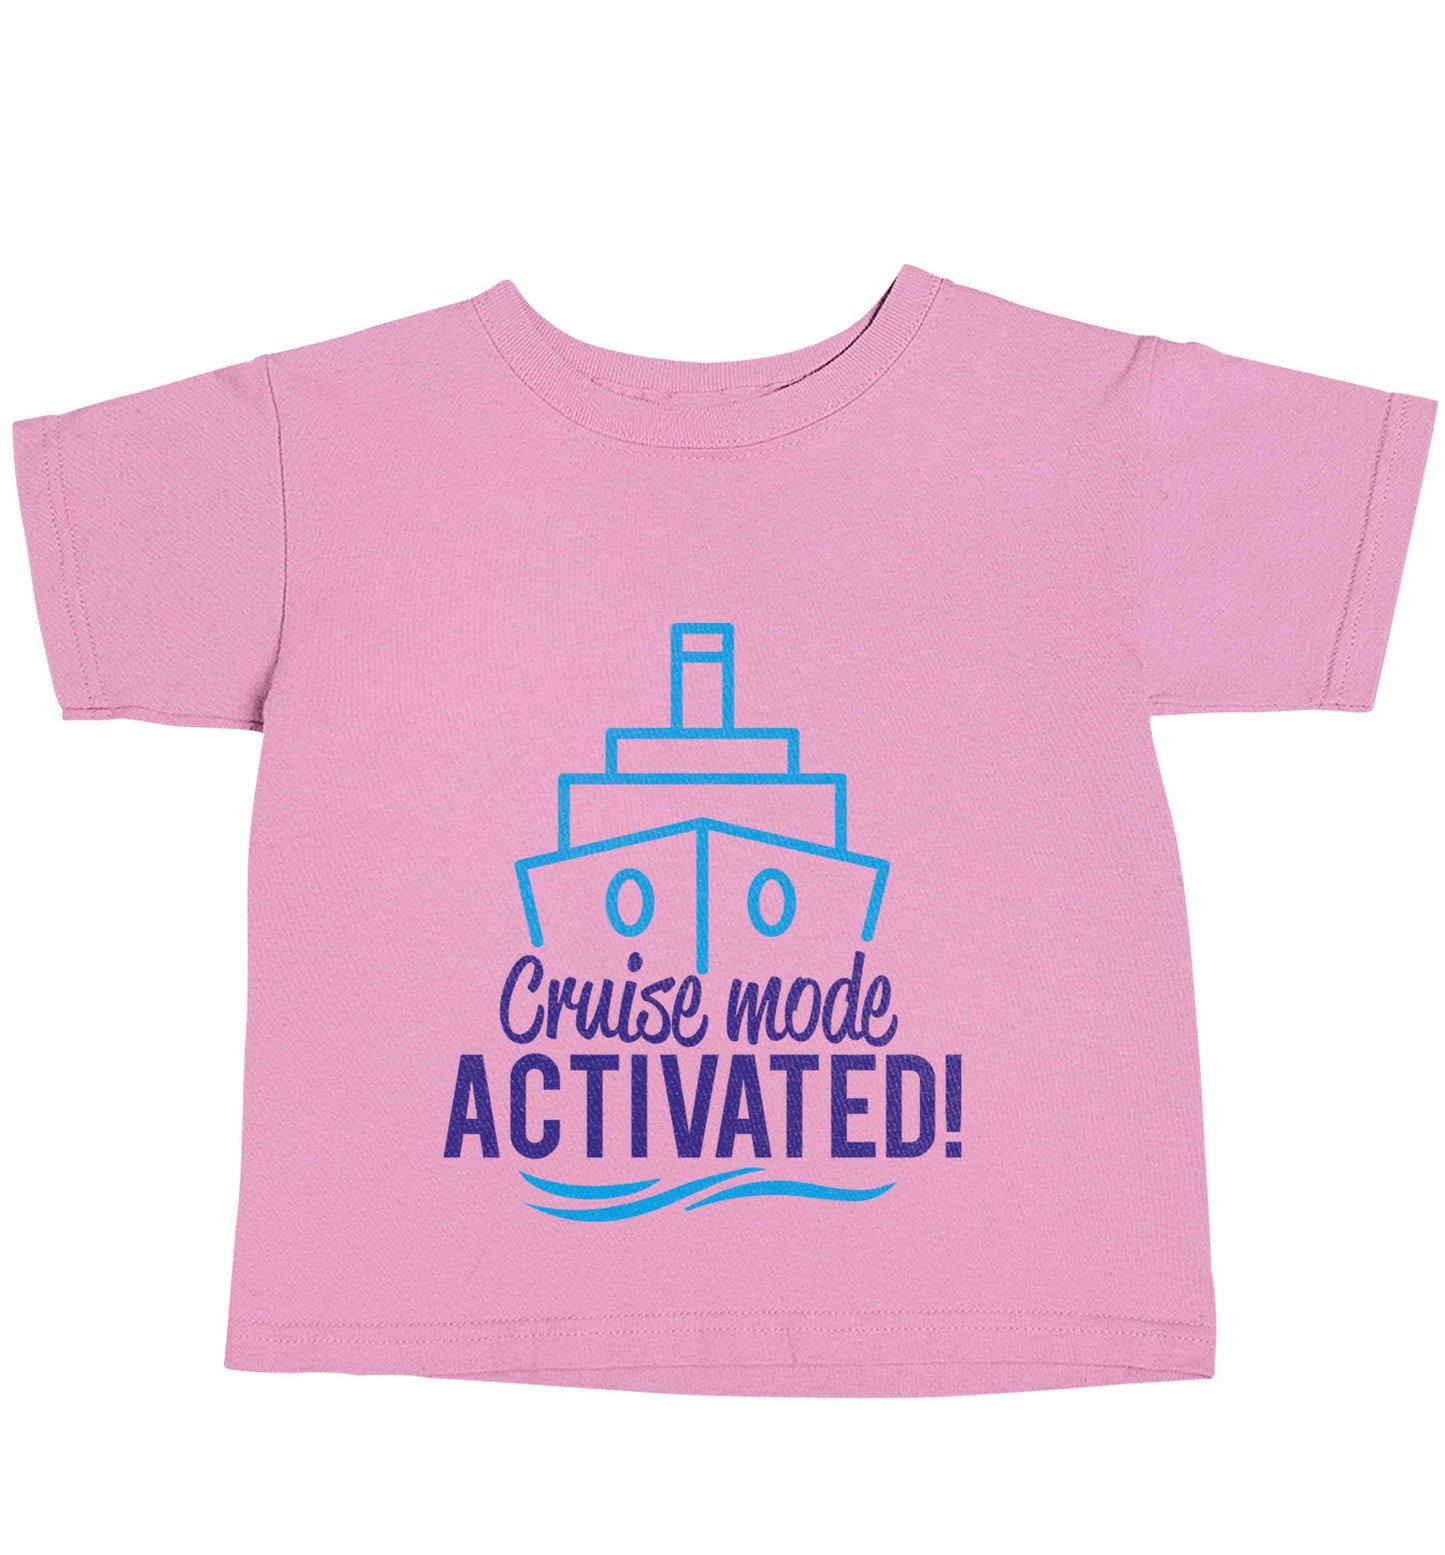 Cruise mode activated light pink baby toddler Tshirt 2 Years